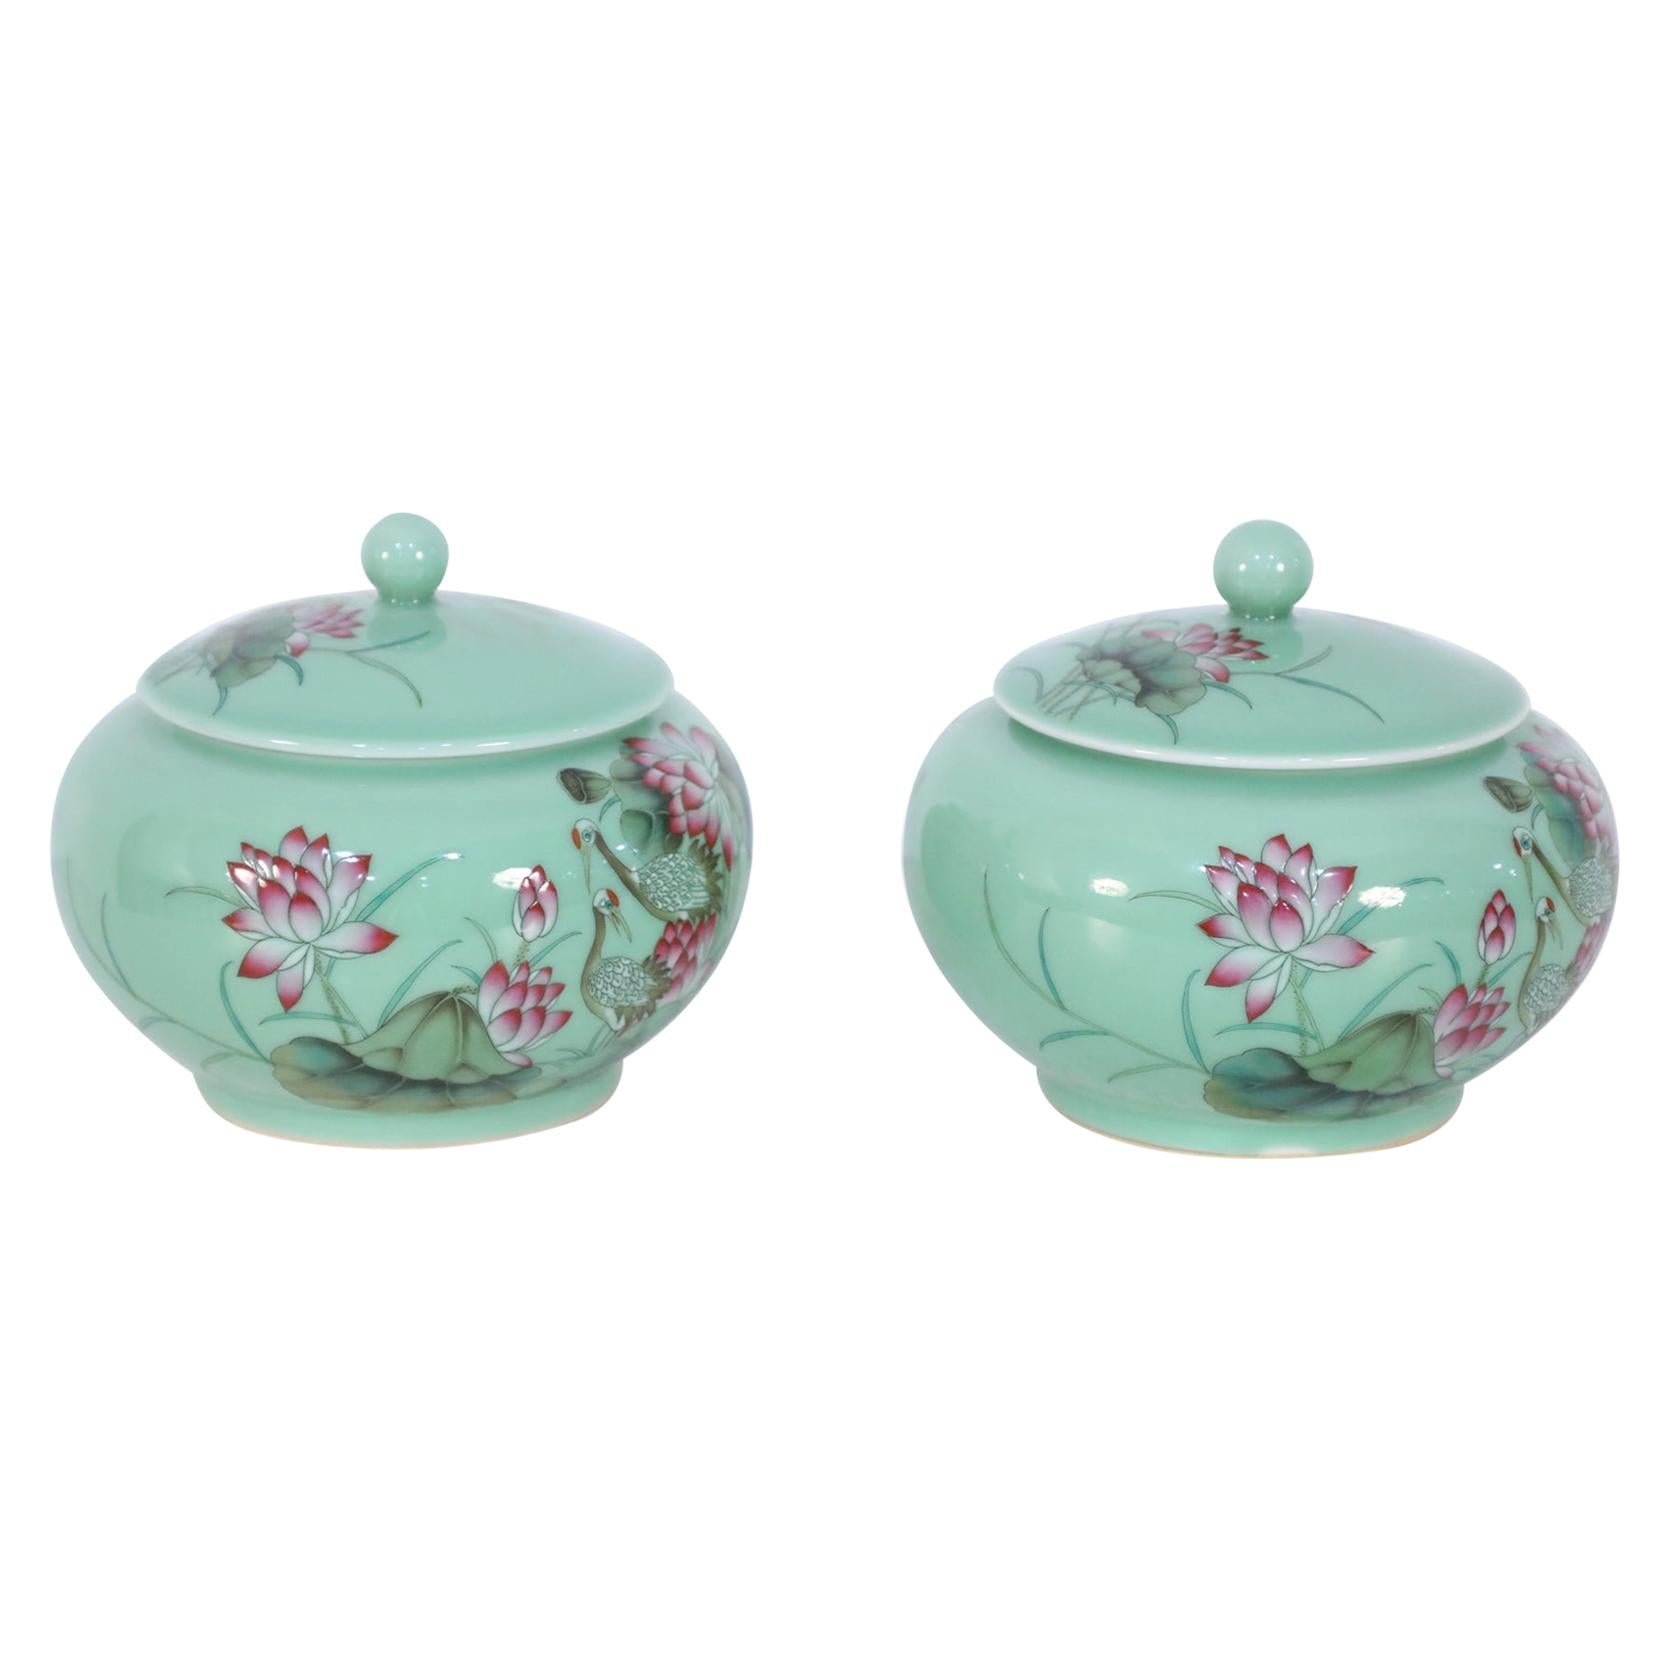 Pair of Chinese Pale Green and Pink Blossom Lidded Jars For Sale